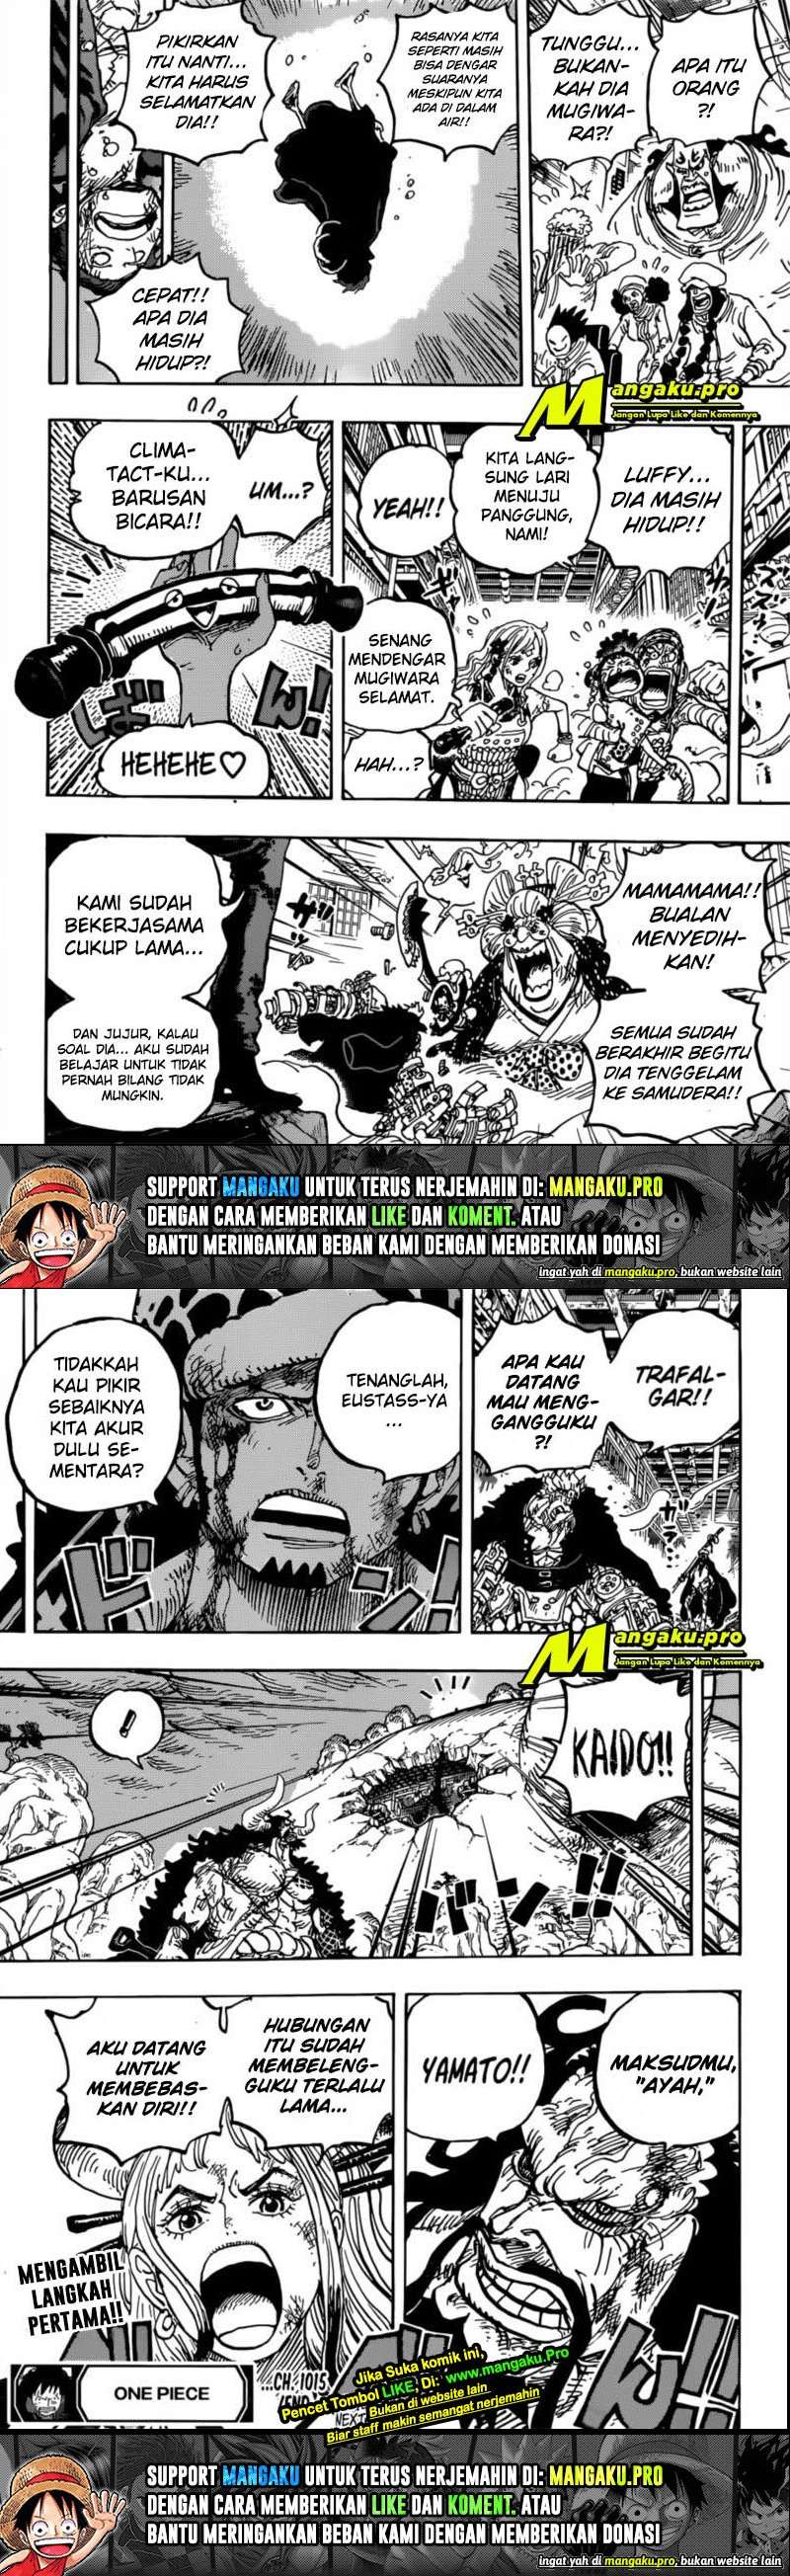 One Piece Chapter 1015 Hq - 55